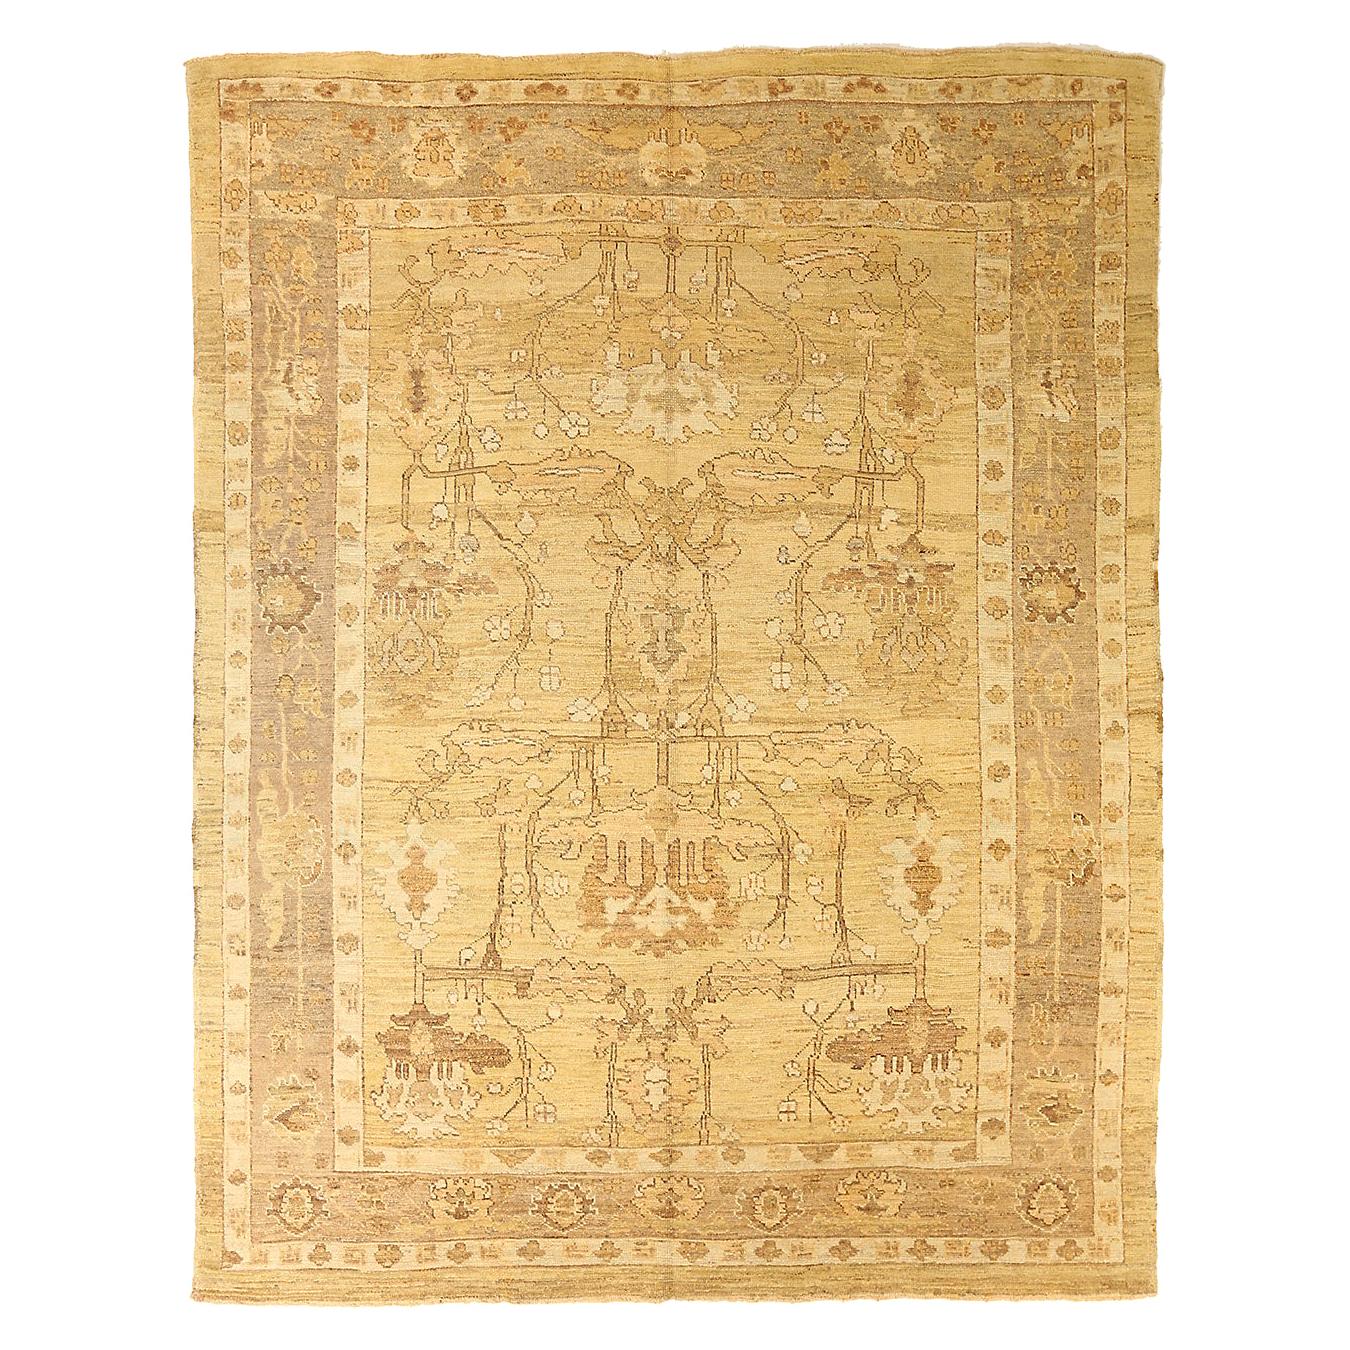 Contemporary Turkish Donegal Rug with Brown and White Floral Patterns